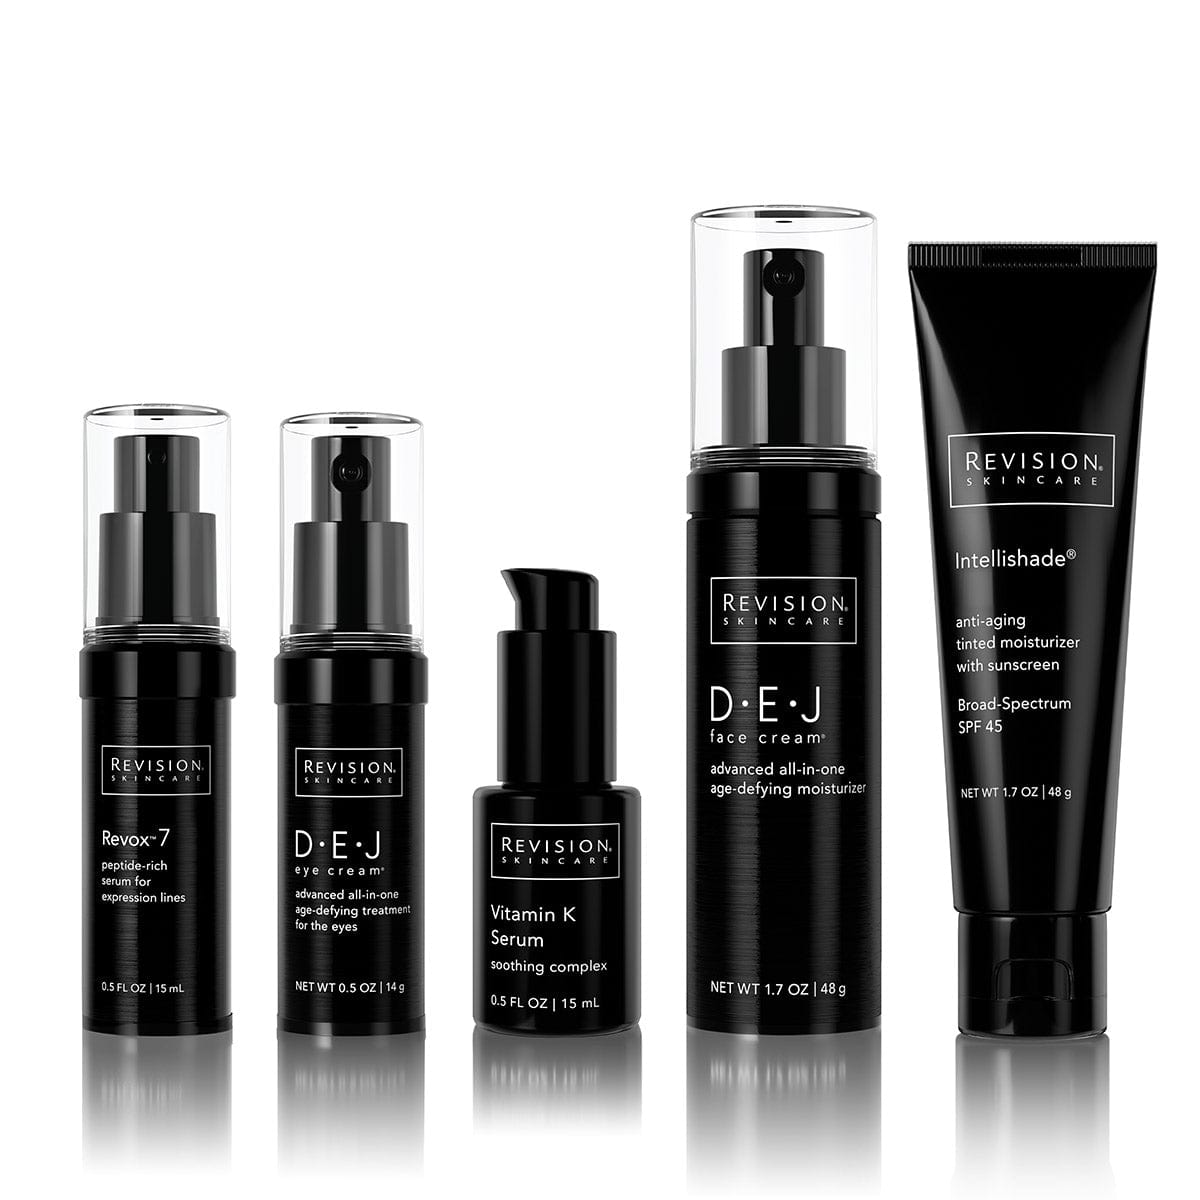 Injection Perfection Full Size Regimen Collection